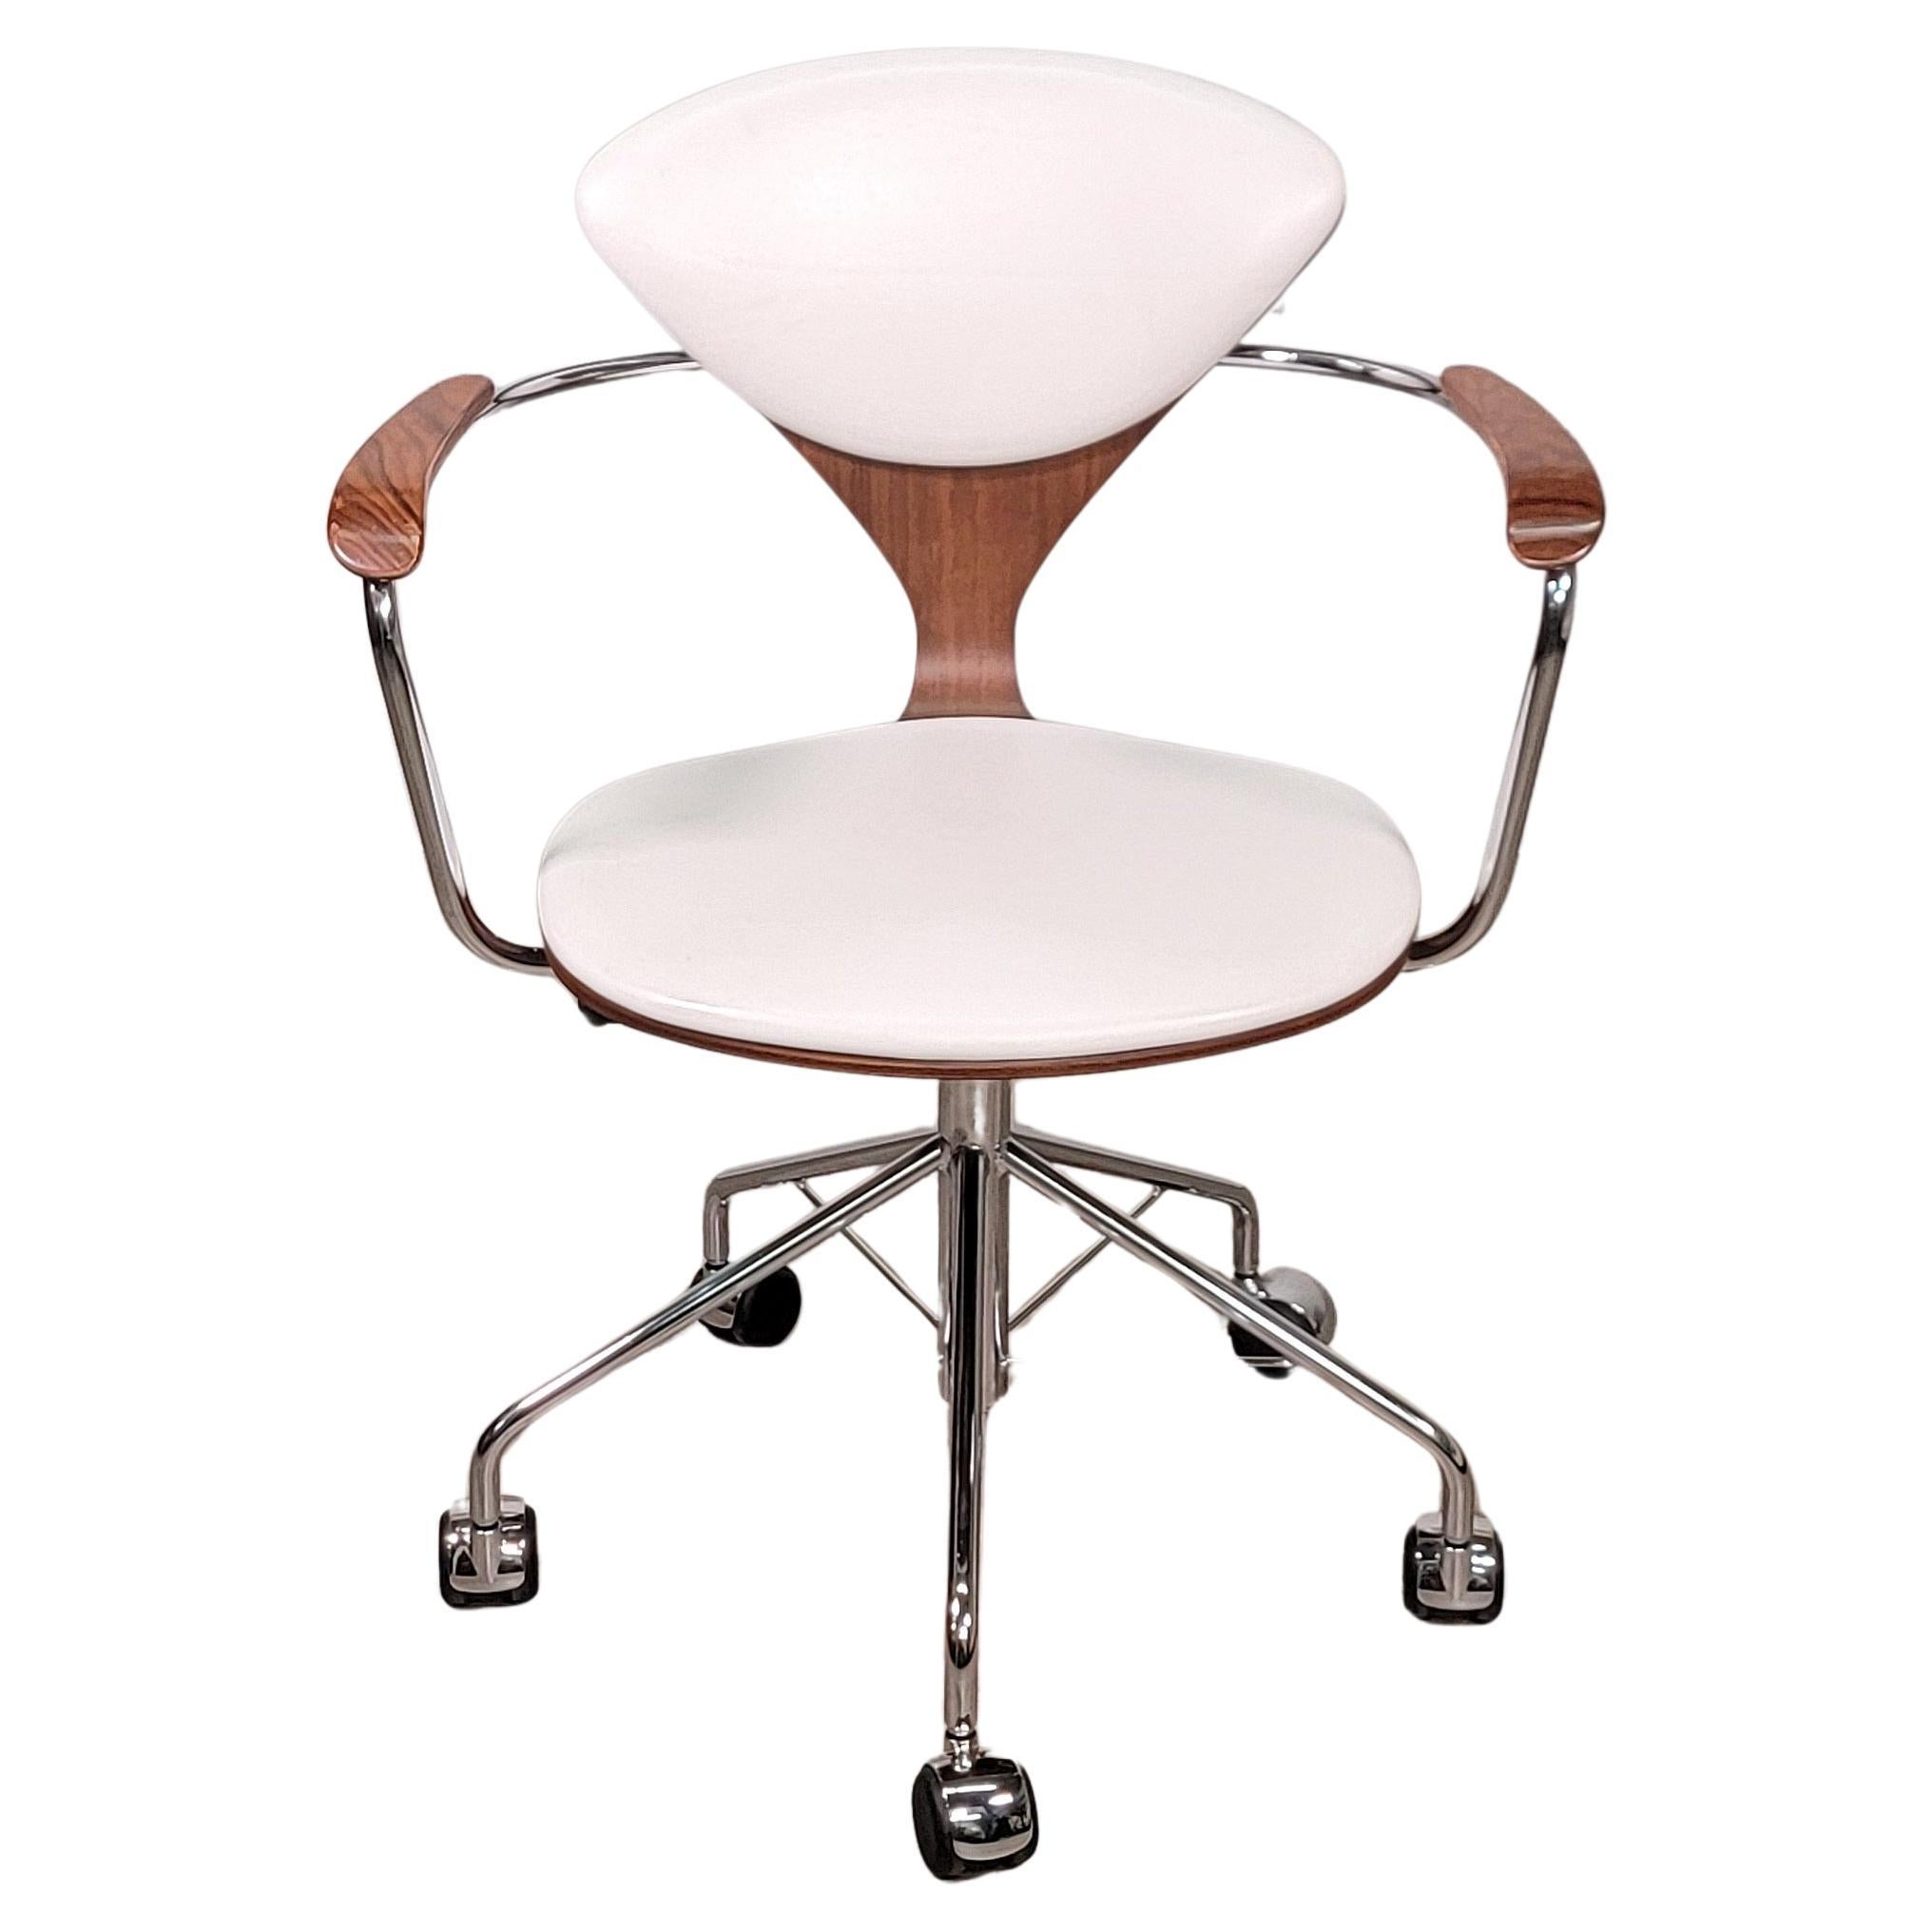 Norman Cherner Chair